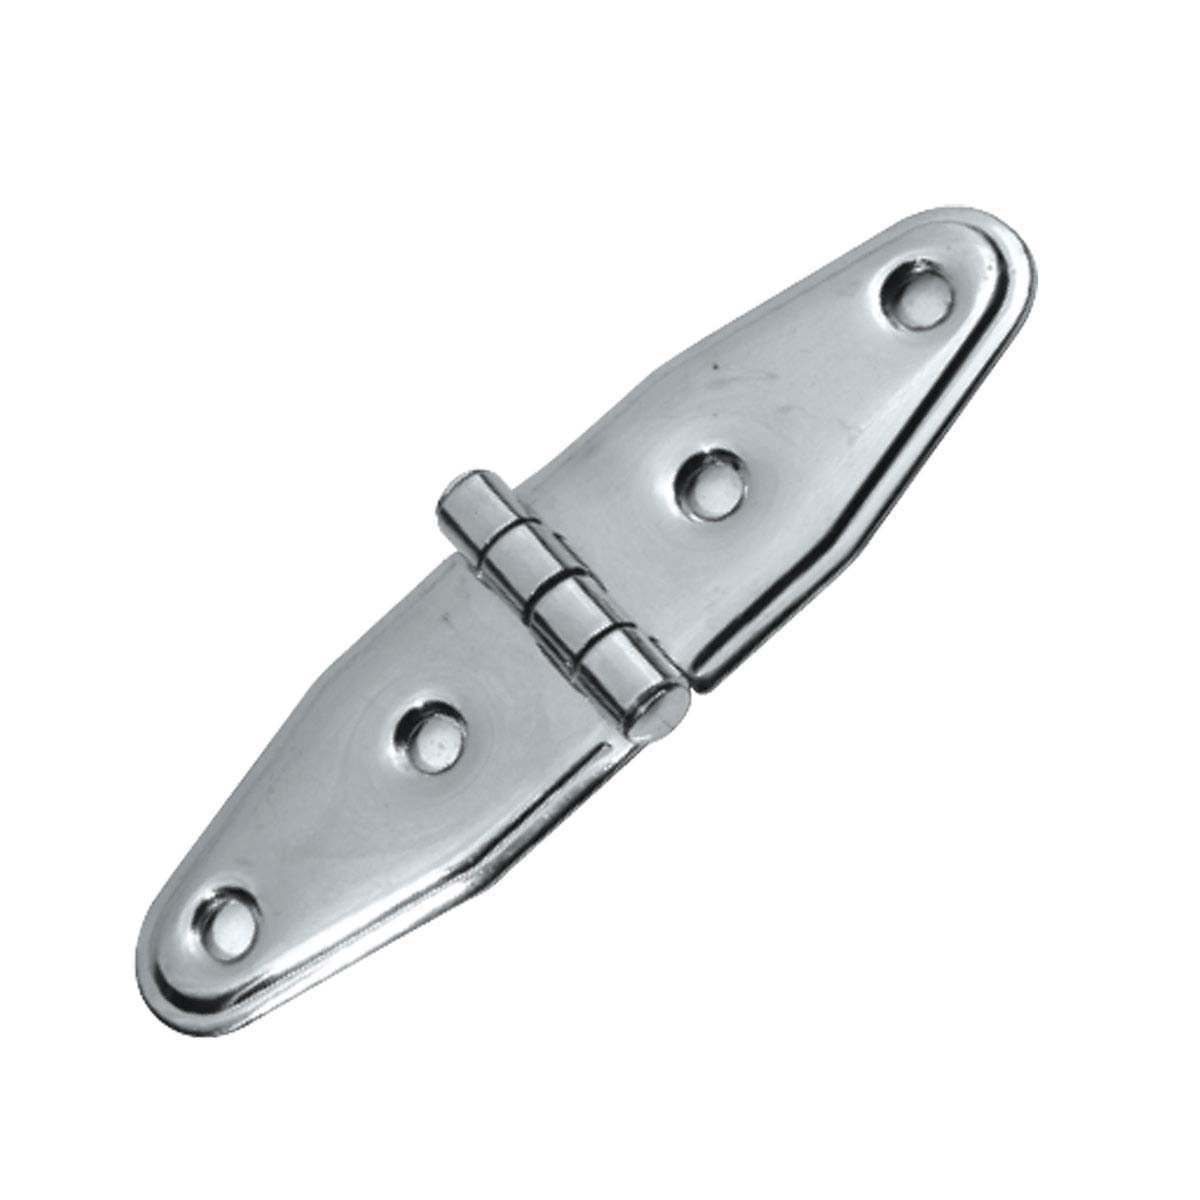 Pressed Stainless Steel Hinge Stainless Steel Strap 105 x 31 x 7mm